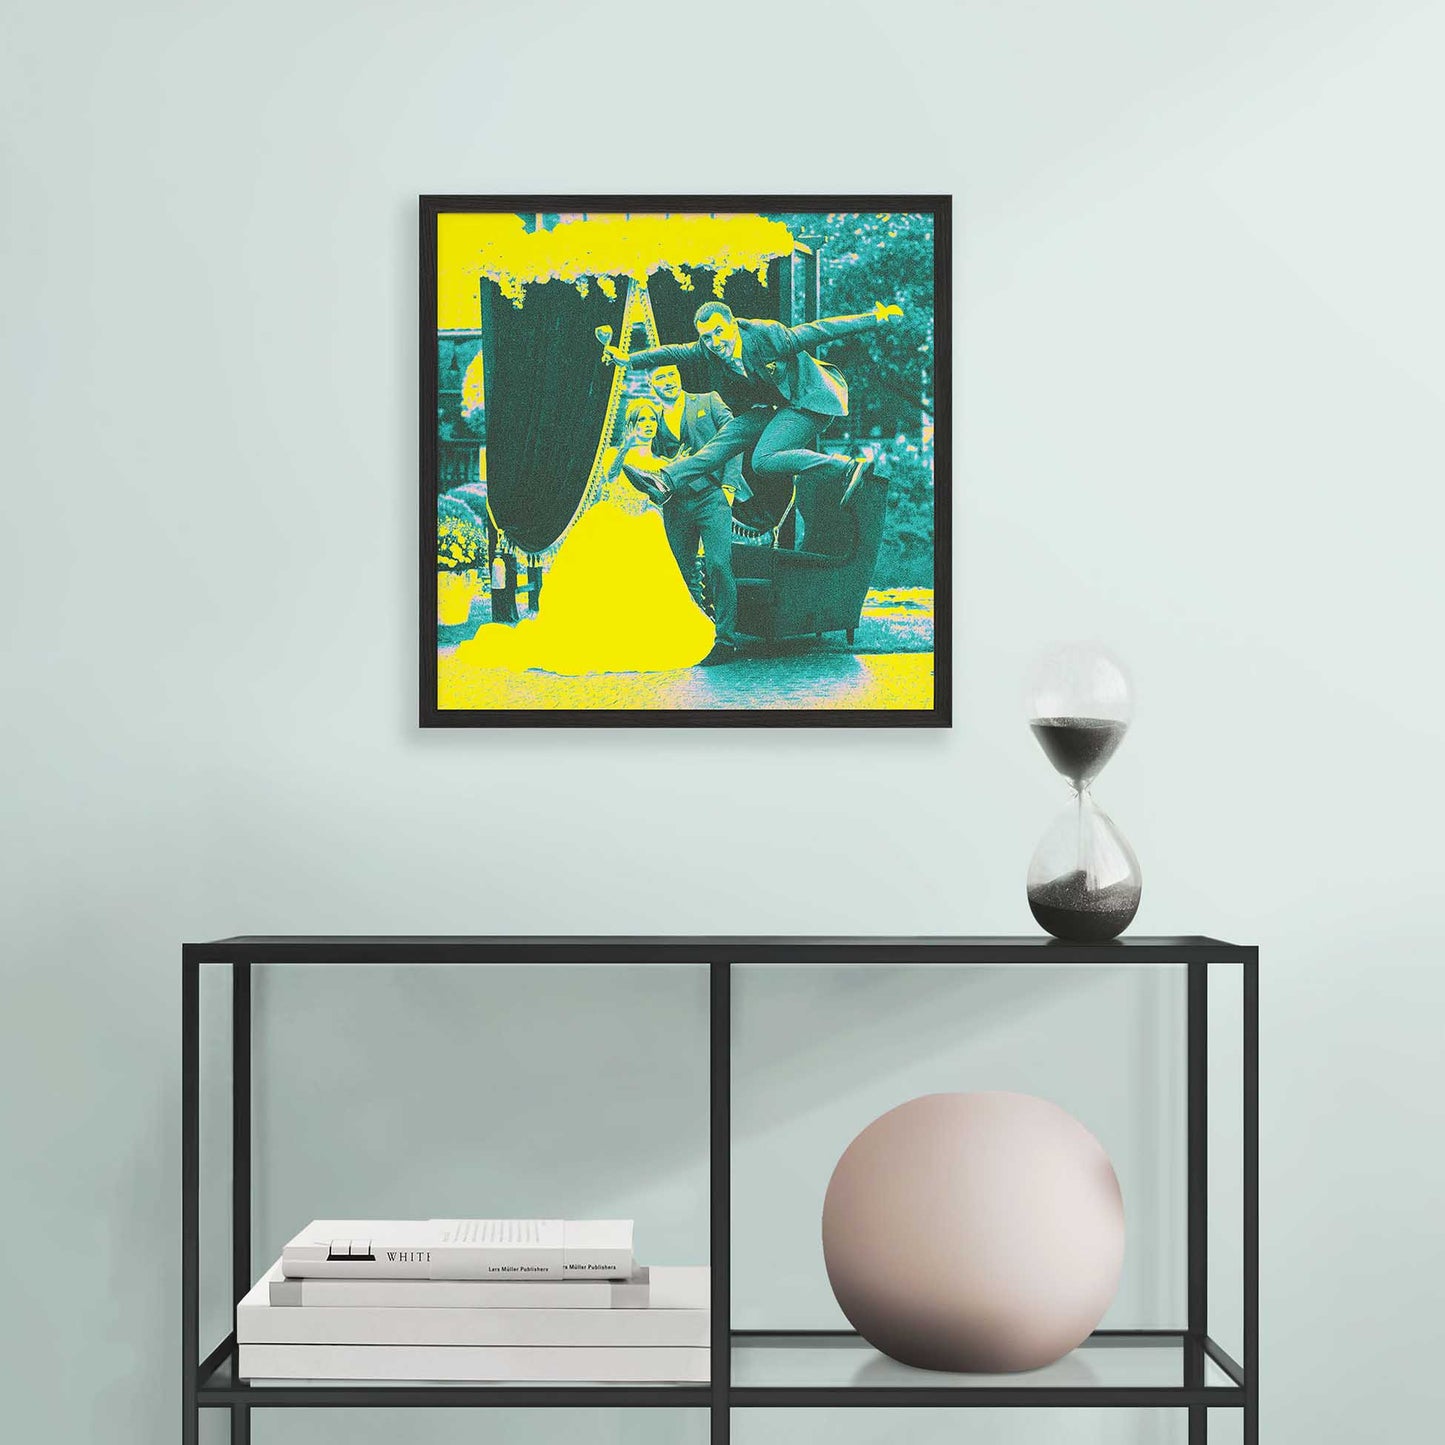 Experience the allure of a Personalised Acid Yellow Framed Print. Its vibrant and bright colors create a vivid and colorful ambiance in your home decor. Crafted with a wooden frame and printed on museum-quality paper, artwork unique